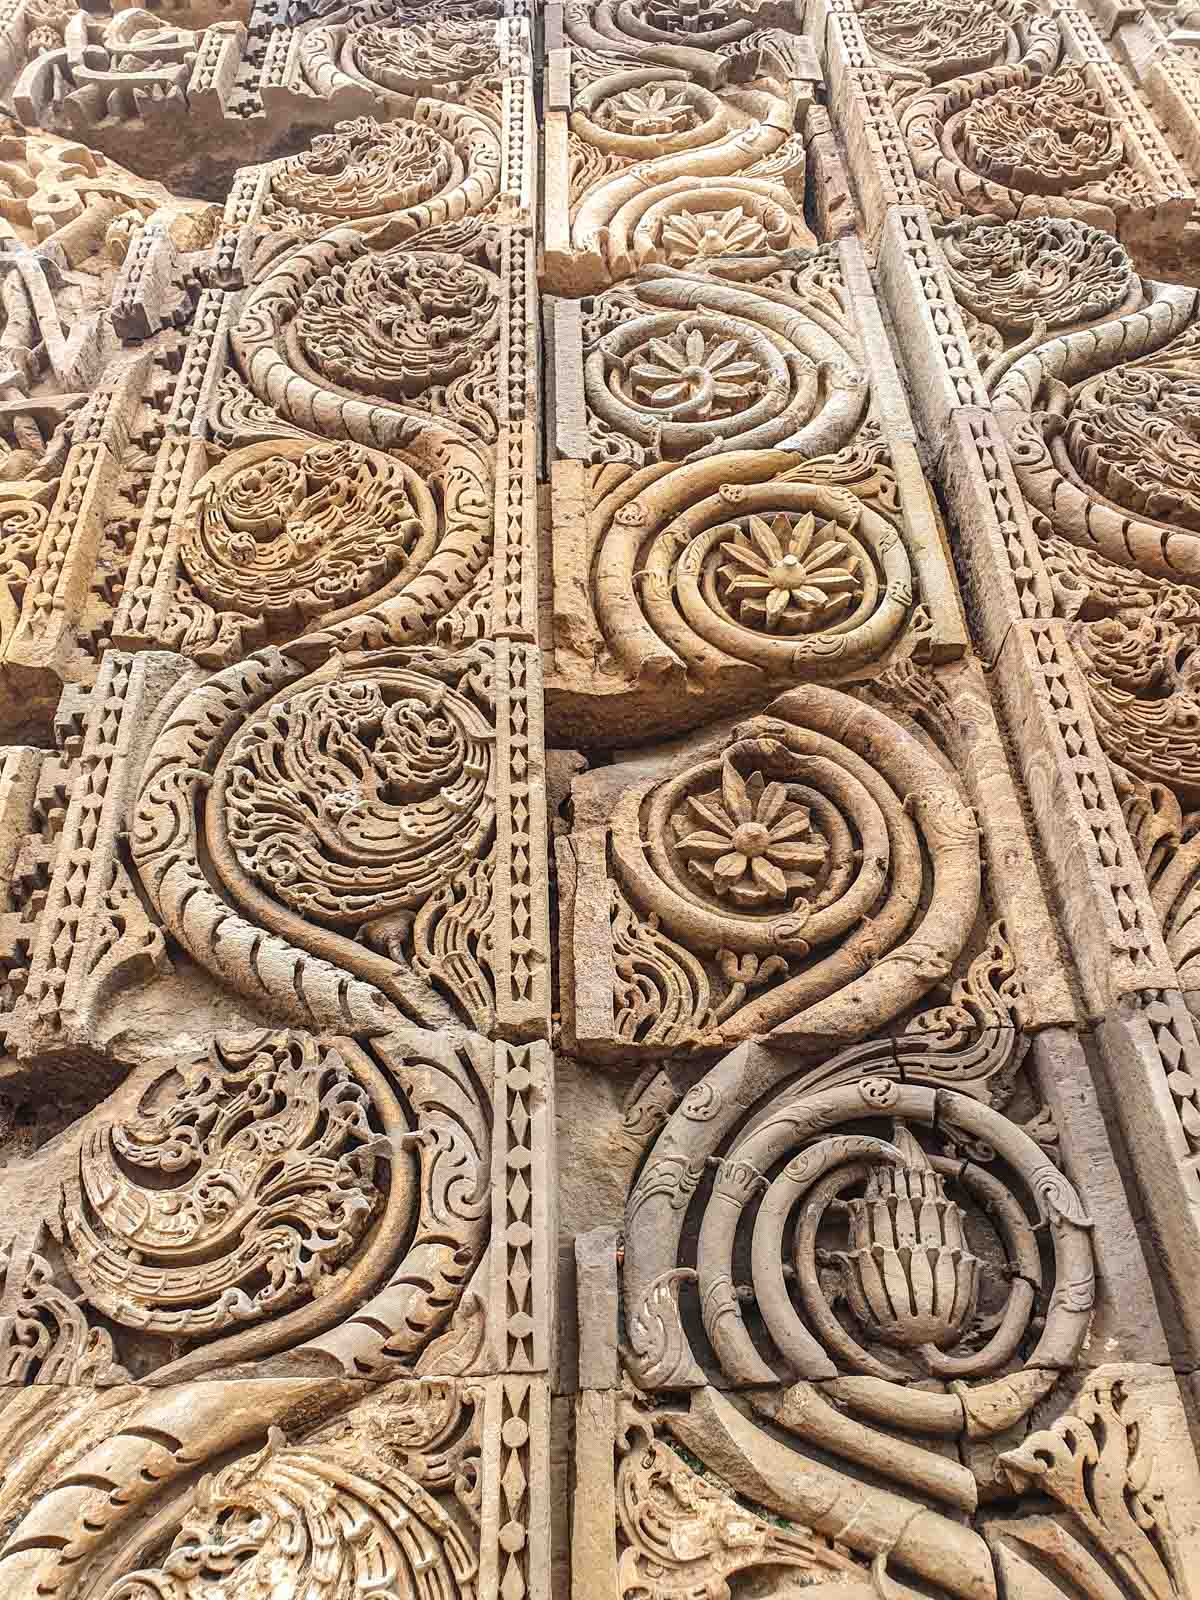 The incredible stone carvings on what was a door or wall of the Quwwut-ul-Islam Mosque Delhi